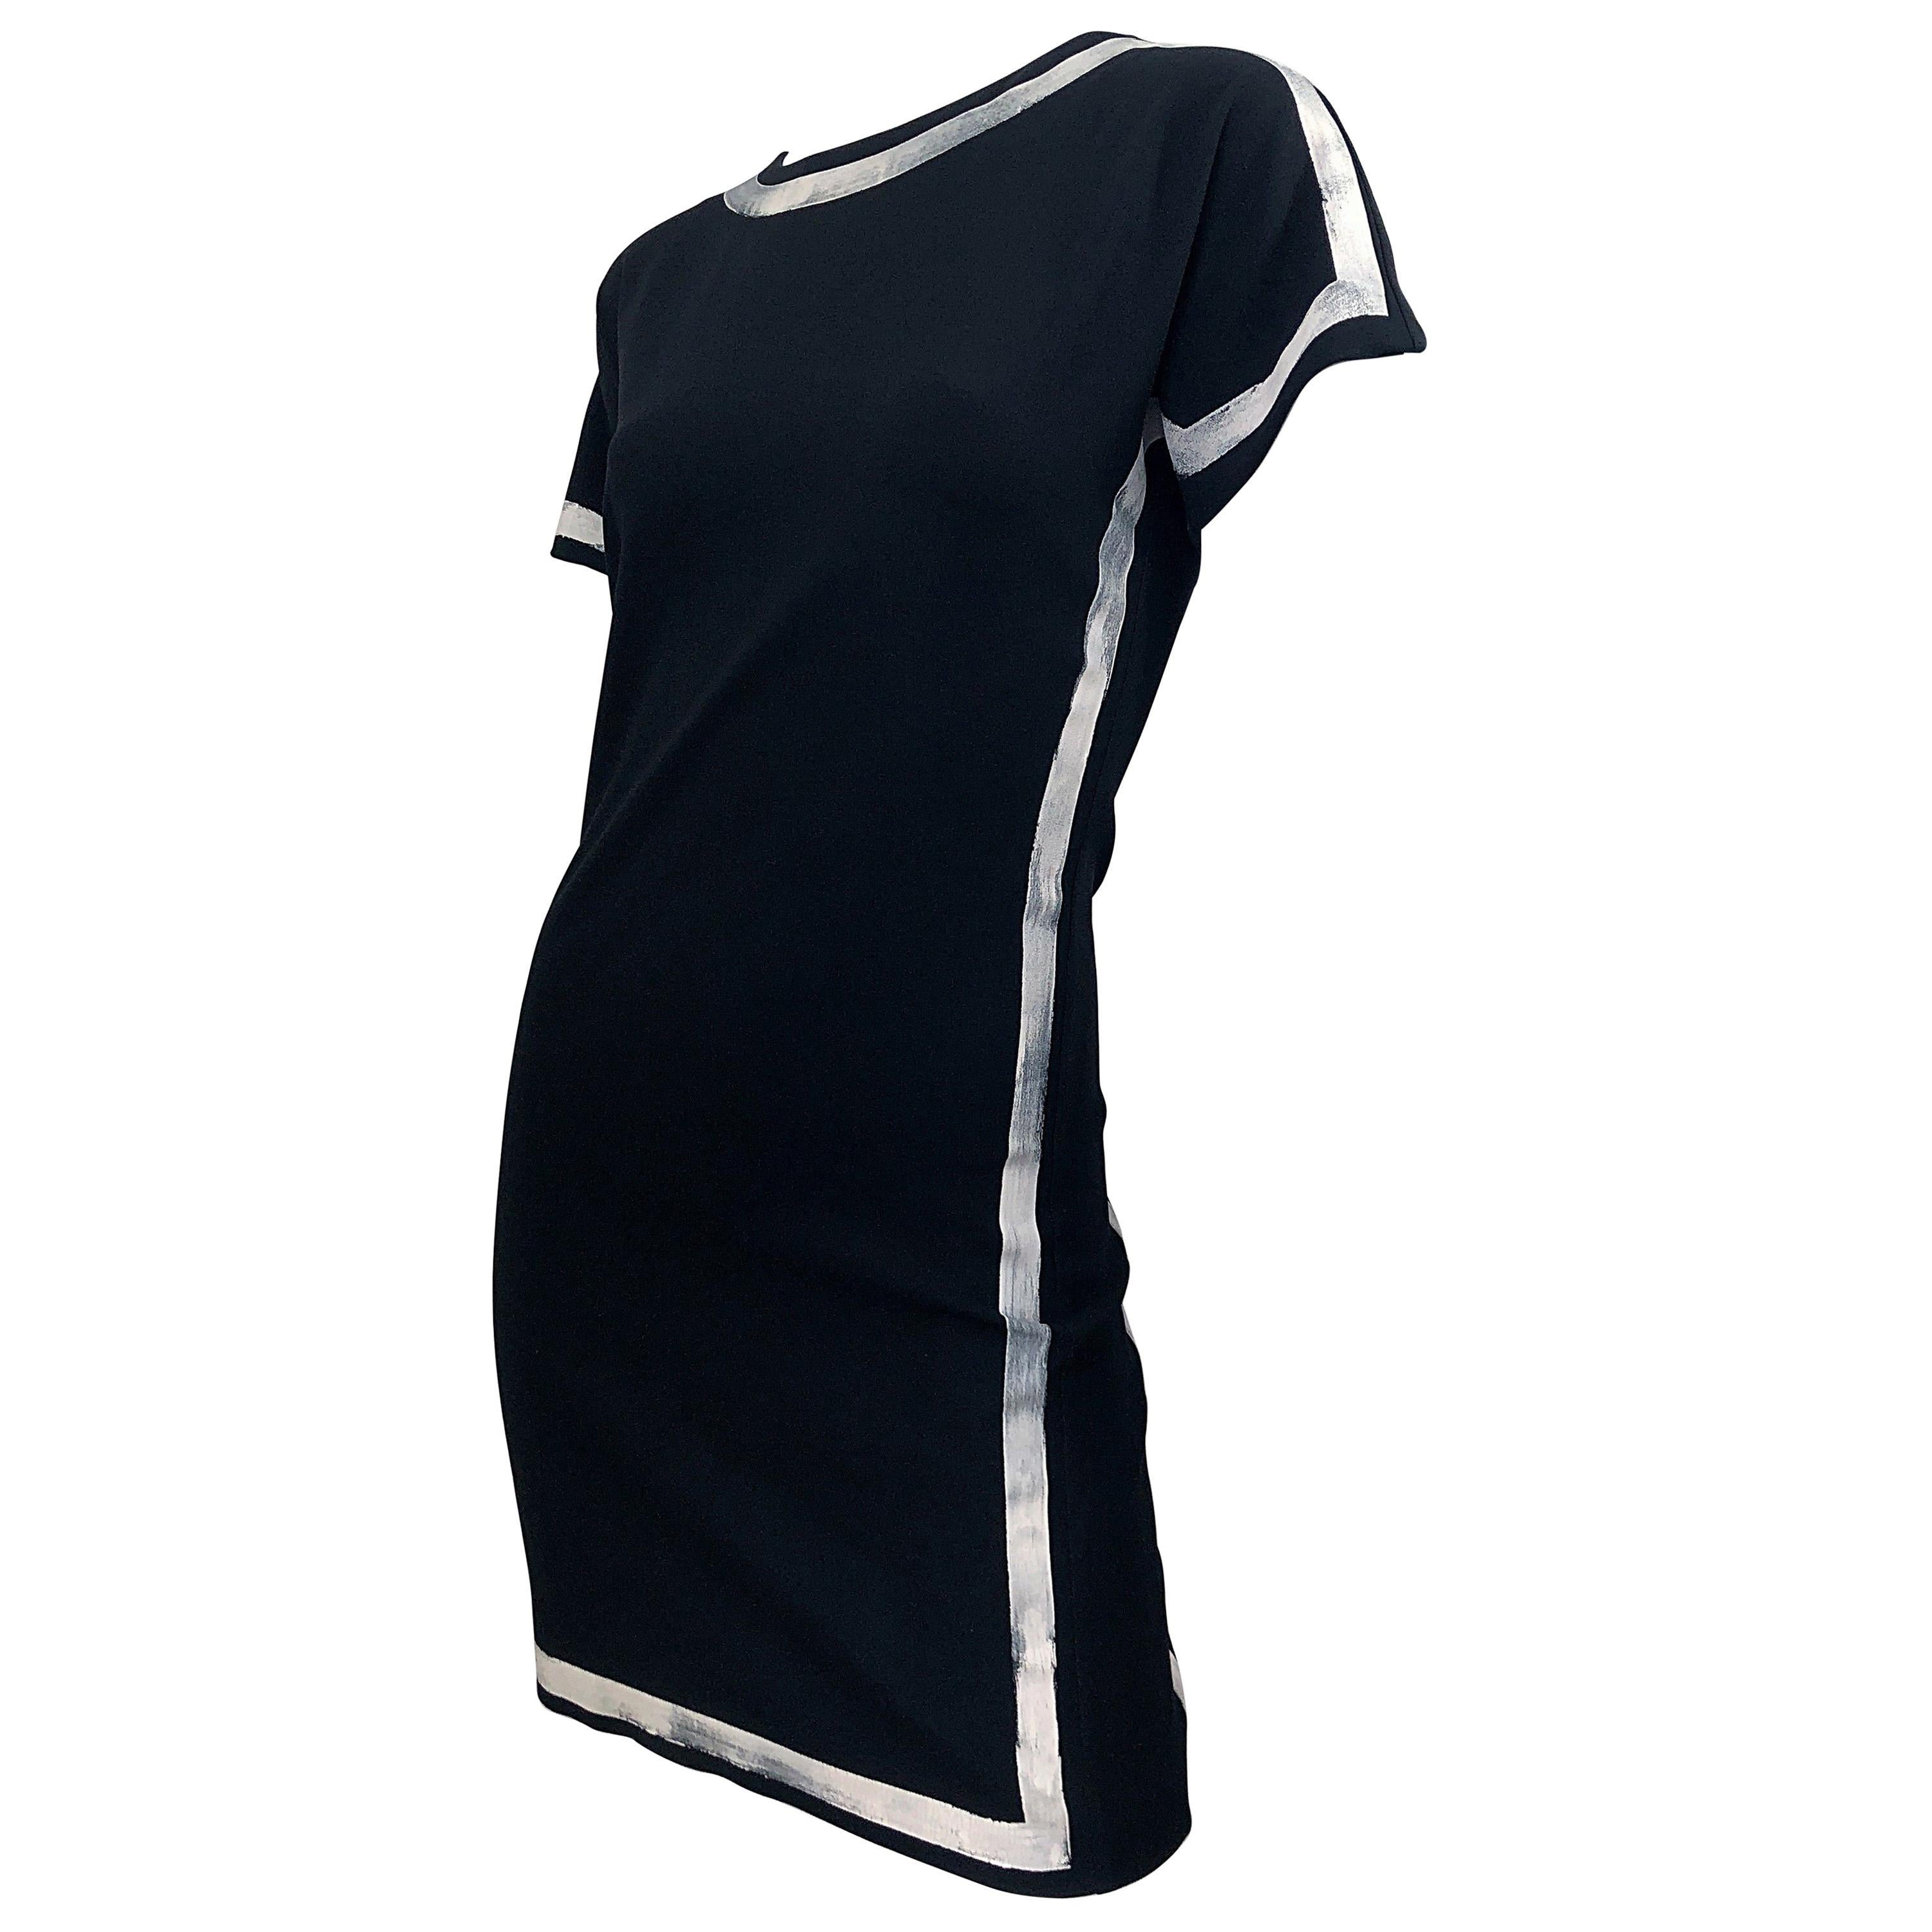 2000s Moschino Cheap & Chic Black and White Size 6 8 Hand Painted Vintage Dress For Sale